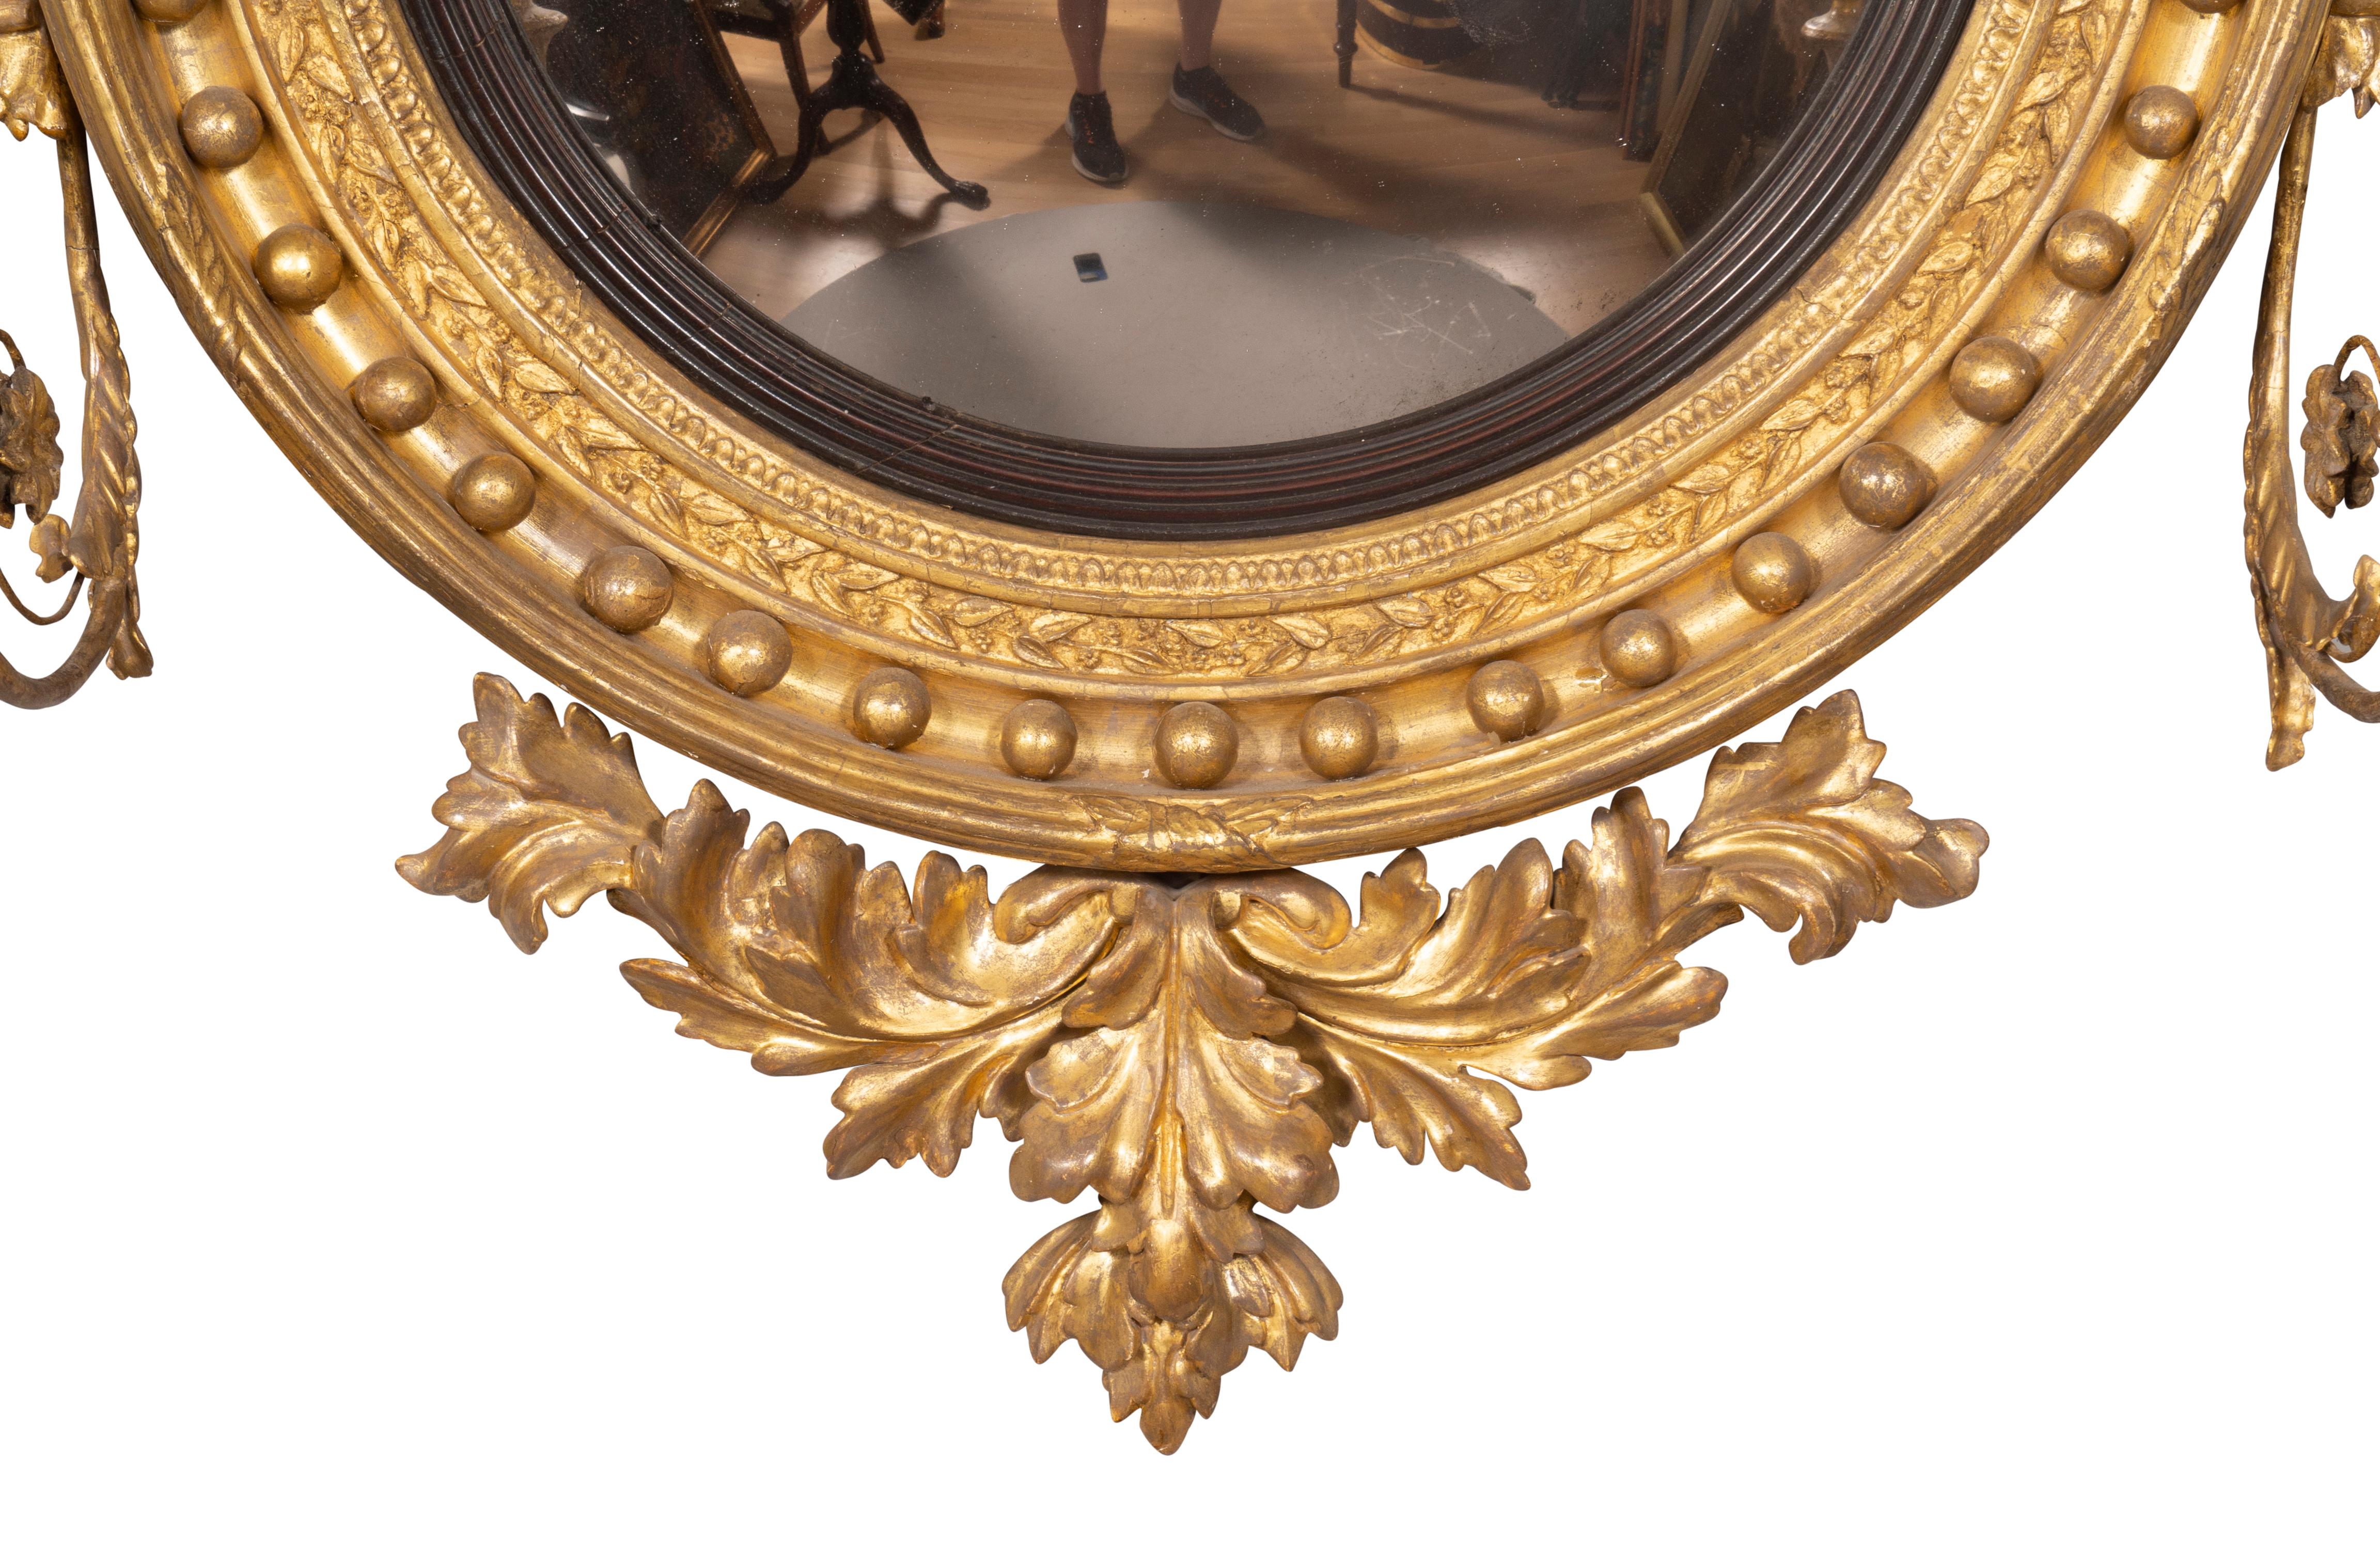 With carved eagle holding two balls on a chain over a convex glass mirror with ebonized outer band, the conforming frame with spherules, mounted candle arms and base leaf carved decoration. Original gilding in great condition.